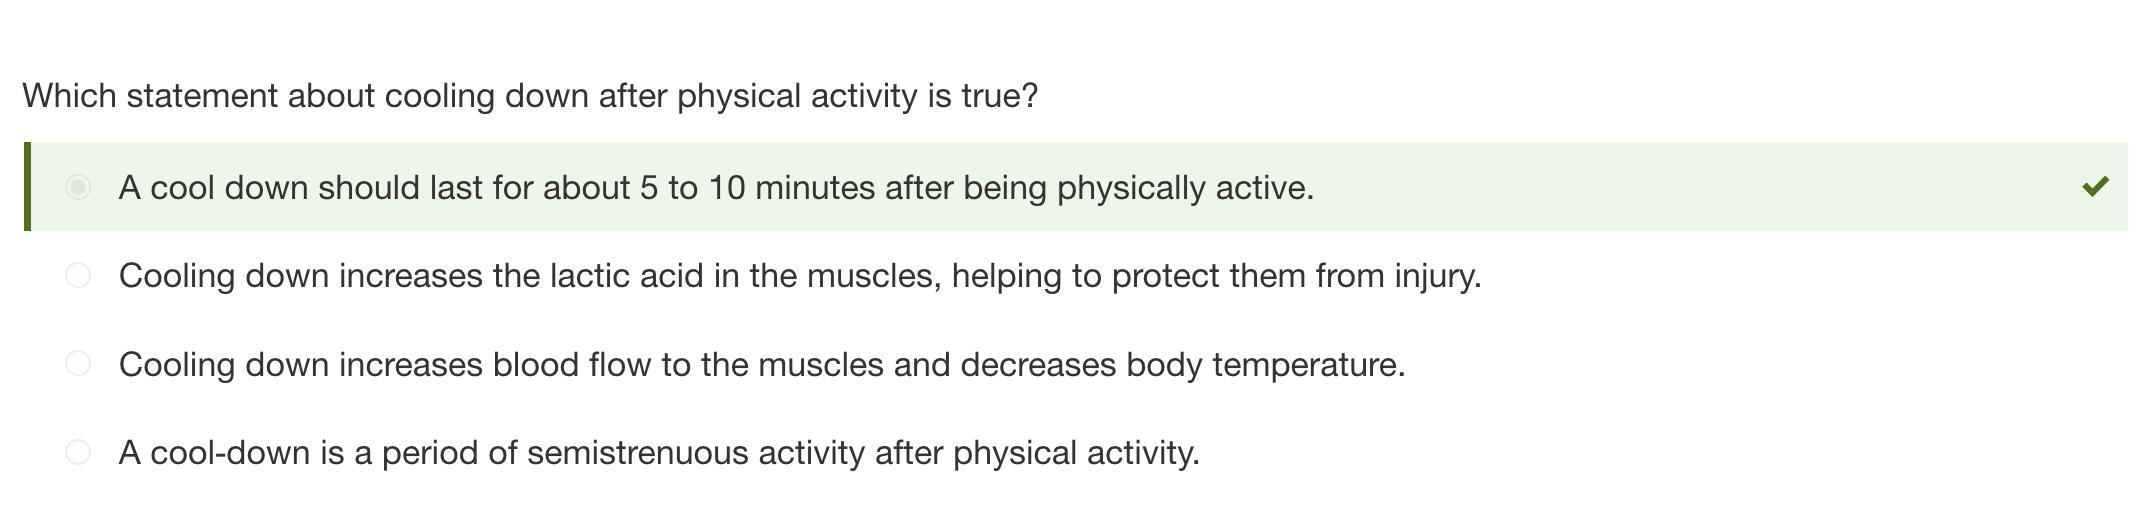 Which Statement About Cooling Down After Physical Activity Is True?Cooling Down Increases Blood Flow